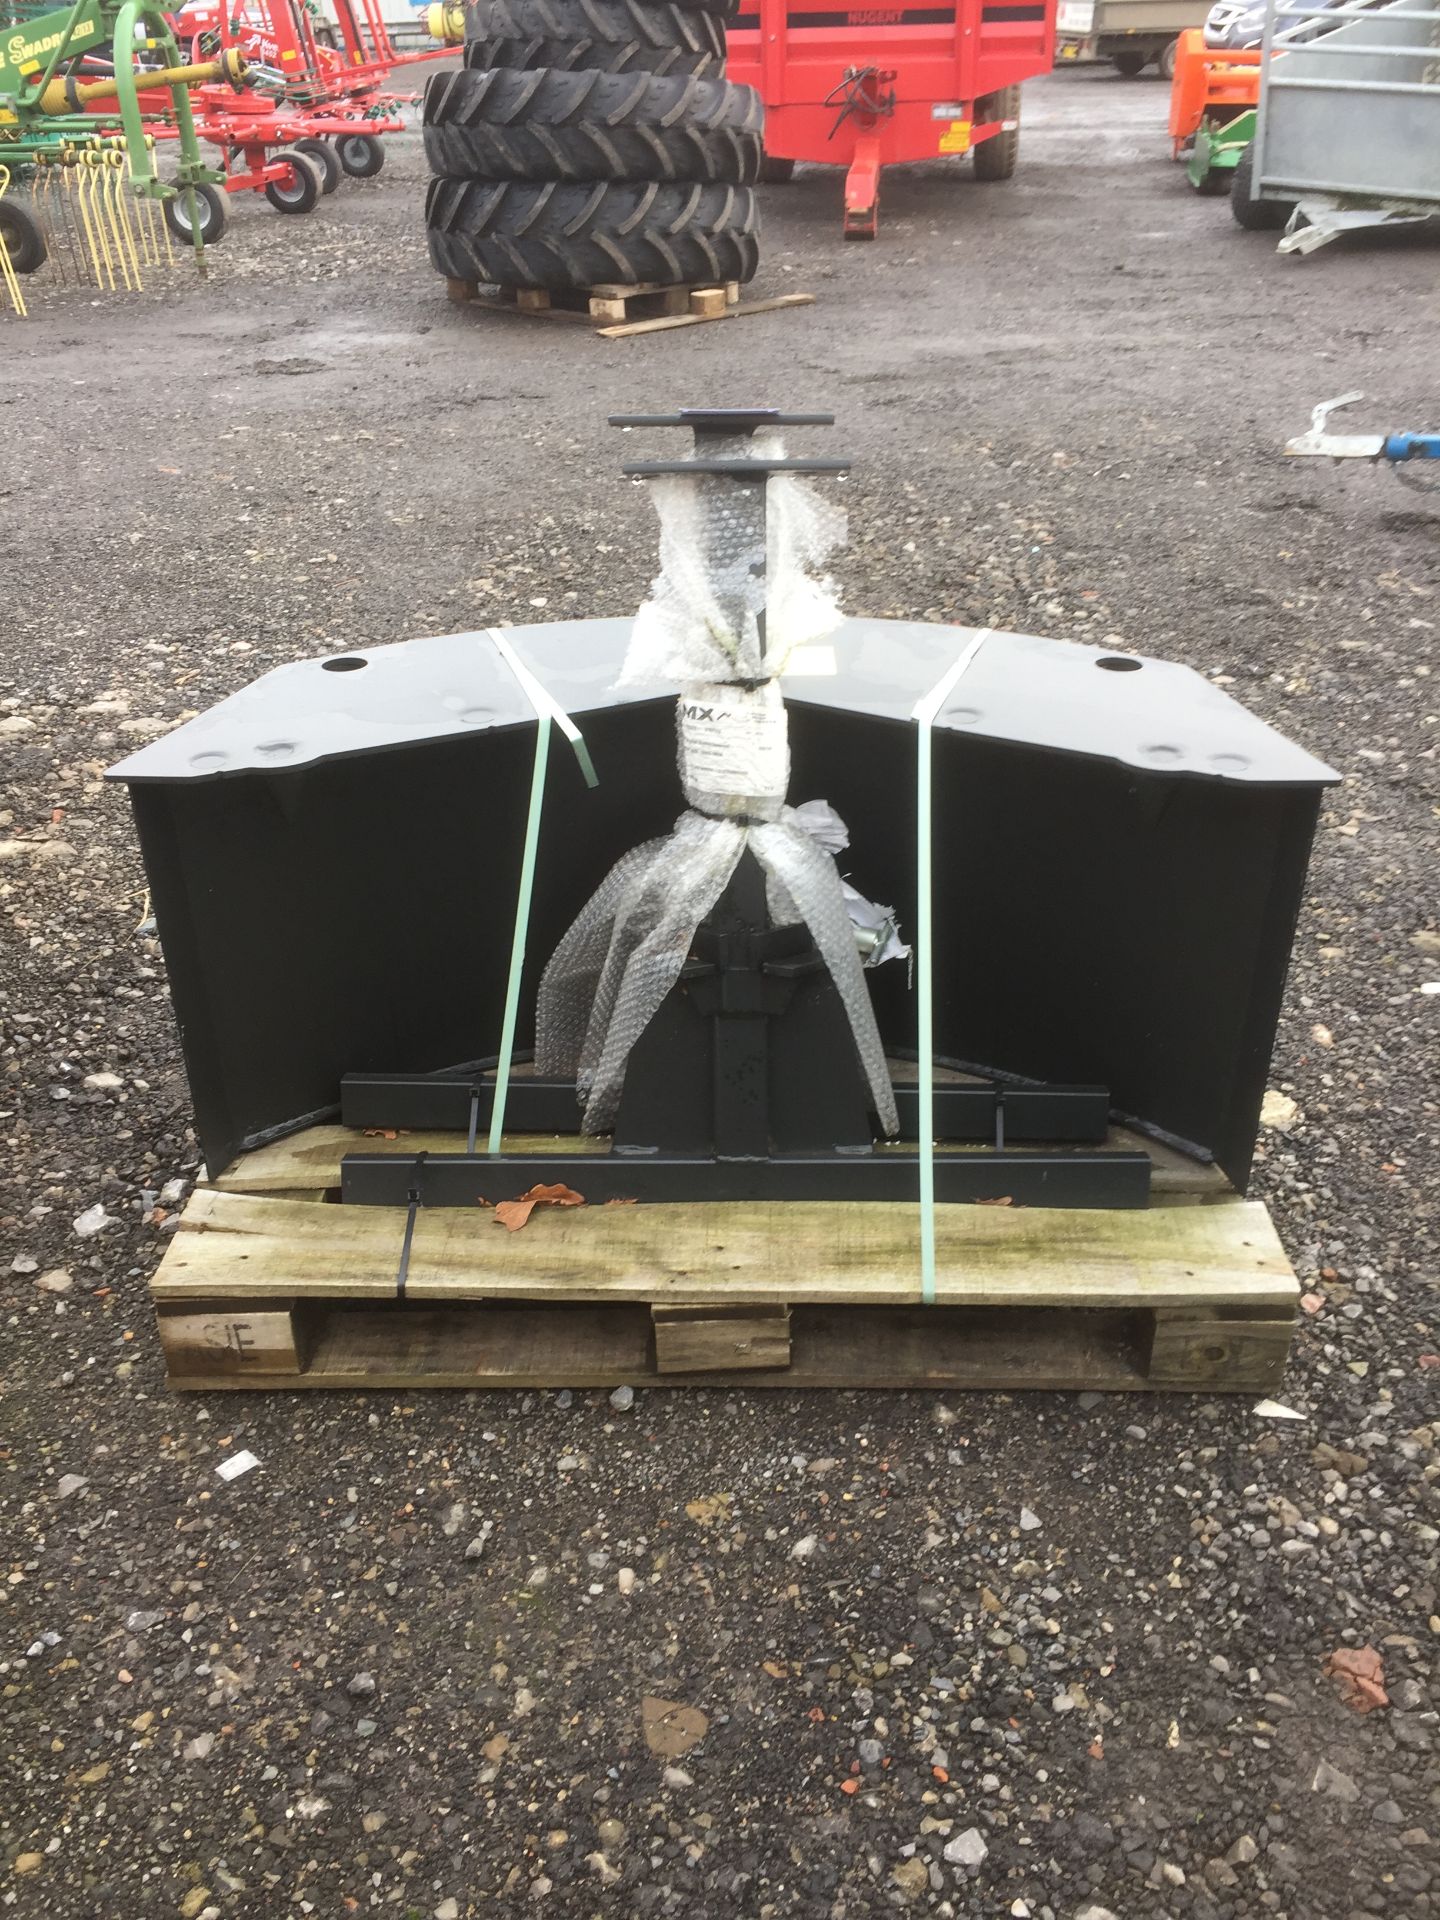 MX Multimass 400kg front linkage weight (unused) (2017) - Image 2 of 2